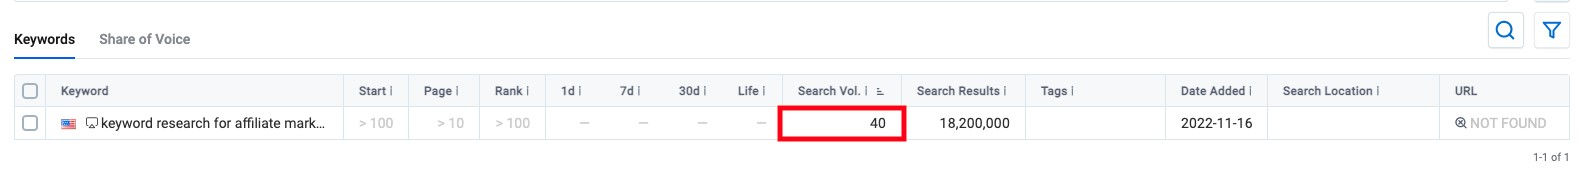 search volume change example